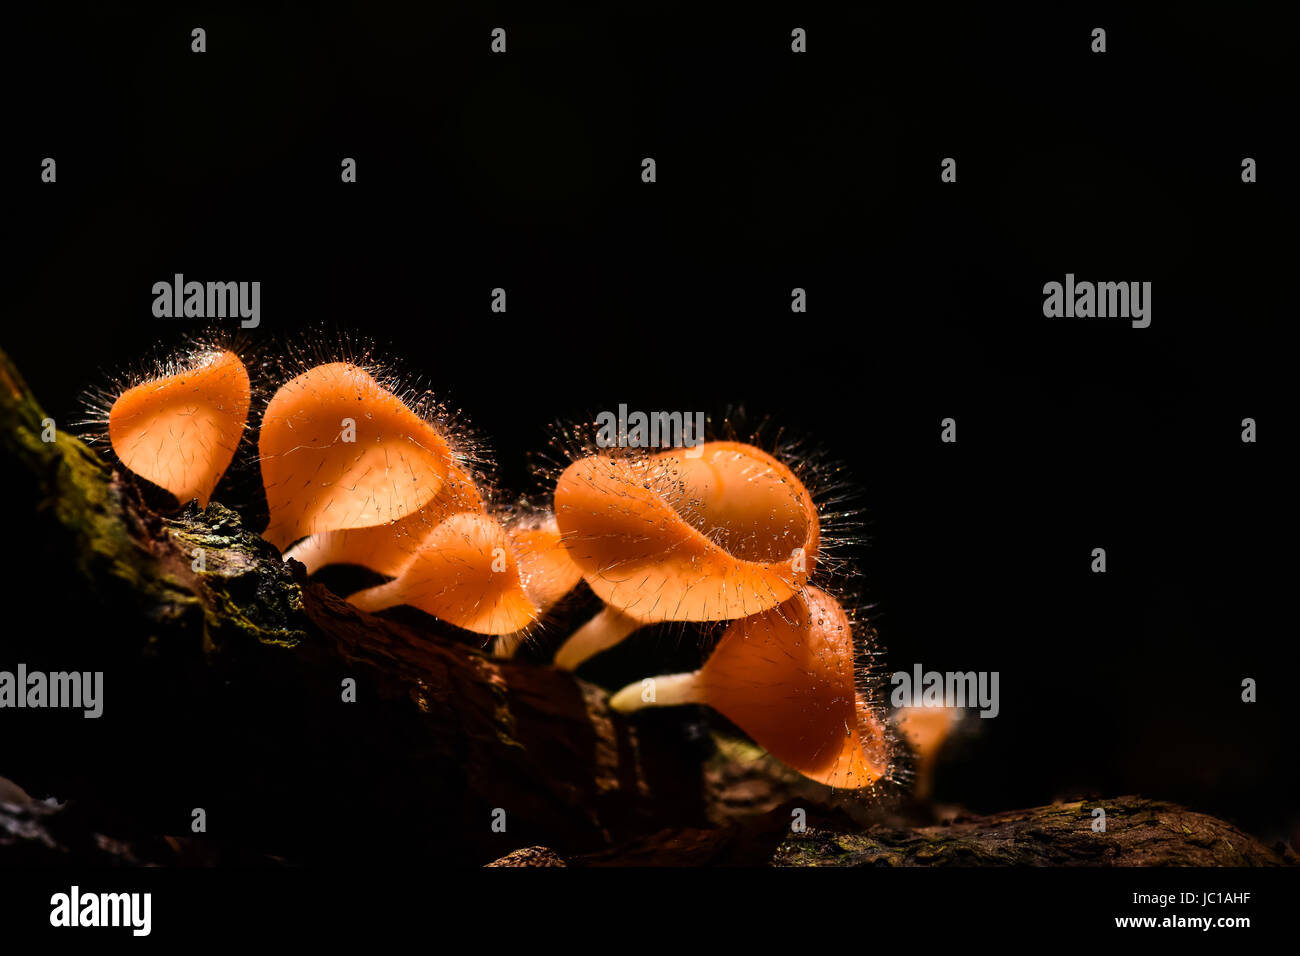 Hairy mushroom with water drops and black background in national park of Thailand Stock Photo